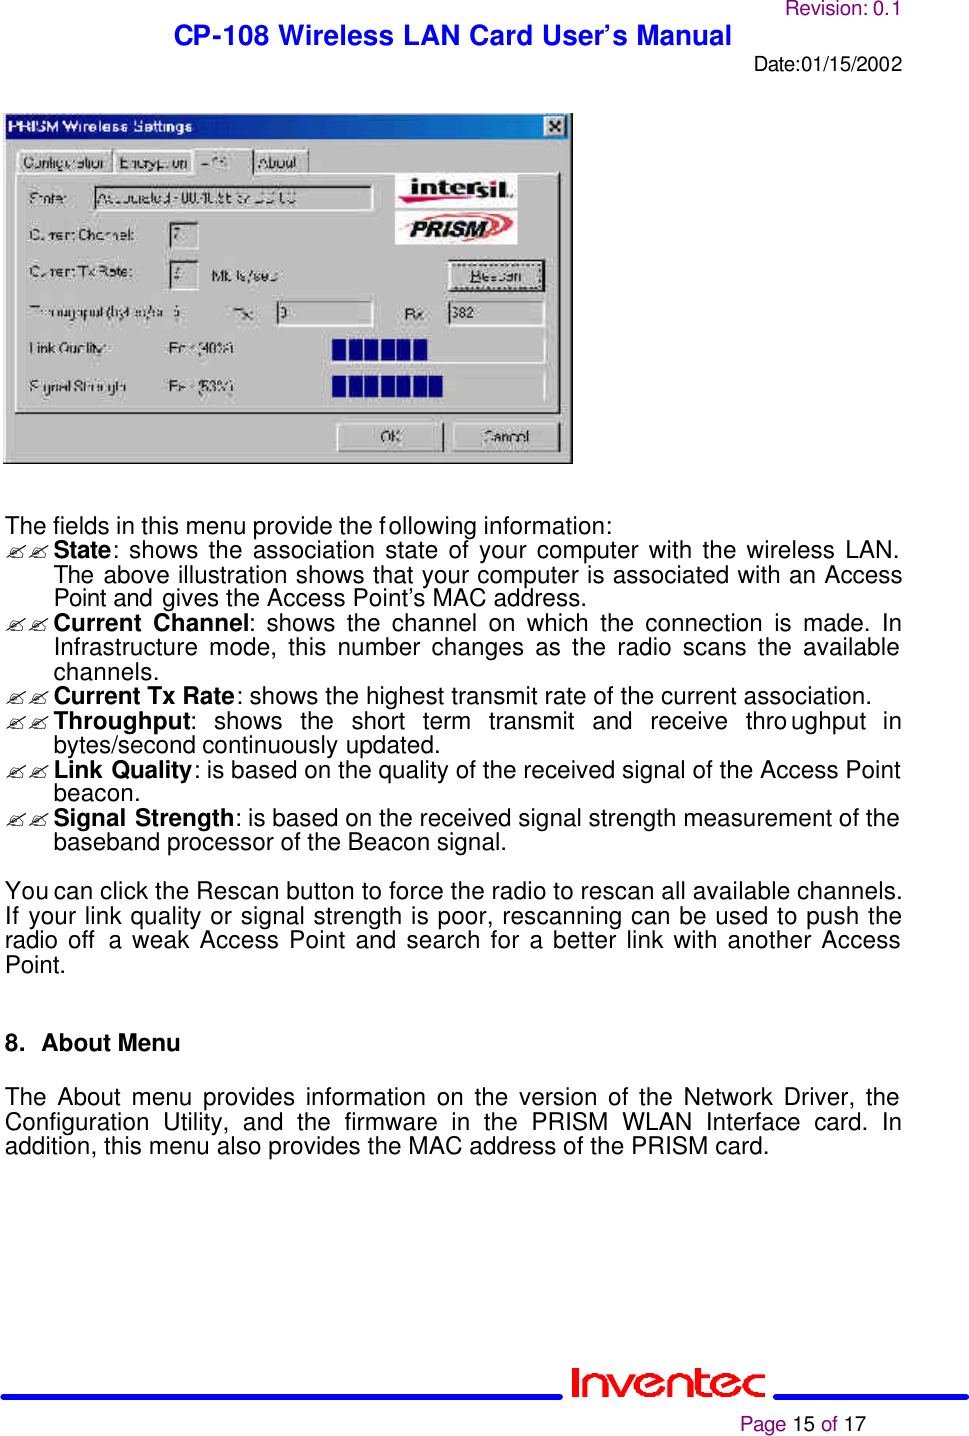 Revision: 0.1 CP-108 Wireless LAN Card User’s Manual Date:01/15/2002                                                                                                                                                             Page 15 of 17                   The fields in this menu provide the following information: ?? State: shows the association state of your computer with the wireless LAN. The above illustration shows that your computer is associated with an Access Point and gives the Access Point’s MAC address. ?? Current Channel: shows the channel on which the connection is made. In Infrastructure mode, this number changes as the radio scans the available channels. ?? Current Tx Rate: shows the highest transmit rate of the current association. ?? Throughput: shows the short term transmit and receive throughput in bytes/second continuously updated. ?? Link Quality: is based on the quality of the received signal of the Access Point beacon. ?? Signal Strength: is based on the received signal strength measurement of the baseband processor of the Beacon signal.  You can click the Rescan button to force the radio to rescan all available channels. If your link quality or signal strength is poor, rescanning can be used to push the radio off a weak Access Point and search for a better link with another Access Point.   8. About Menu  The About menu provides information on the version of the Network Driver, the Configuration Utility, and the firmware in the PRISM WLAN Interface card. In addition, this menu also provides the MAC address of the PRISM card.         